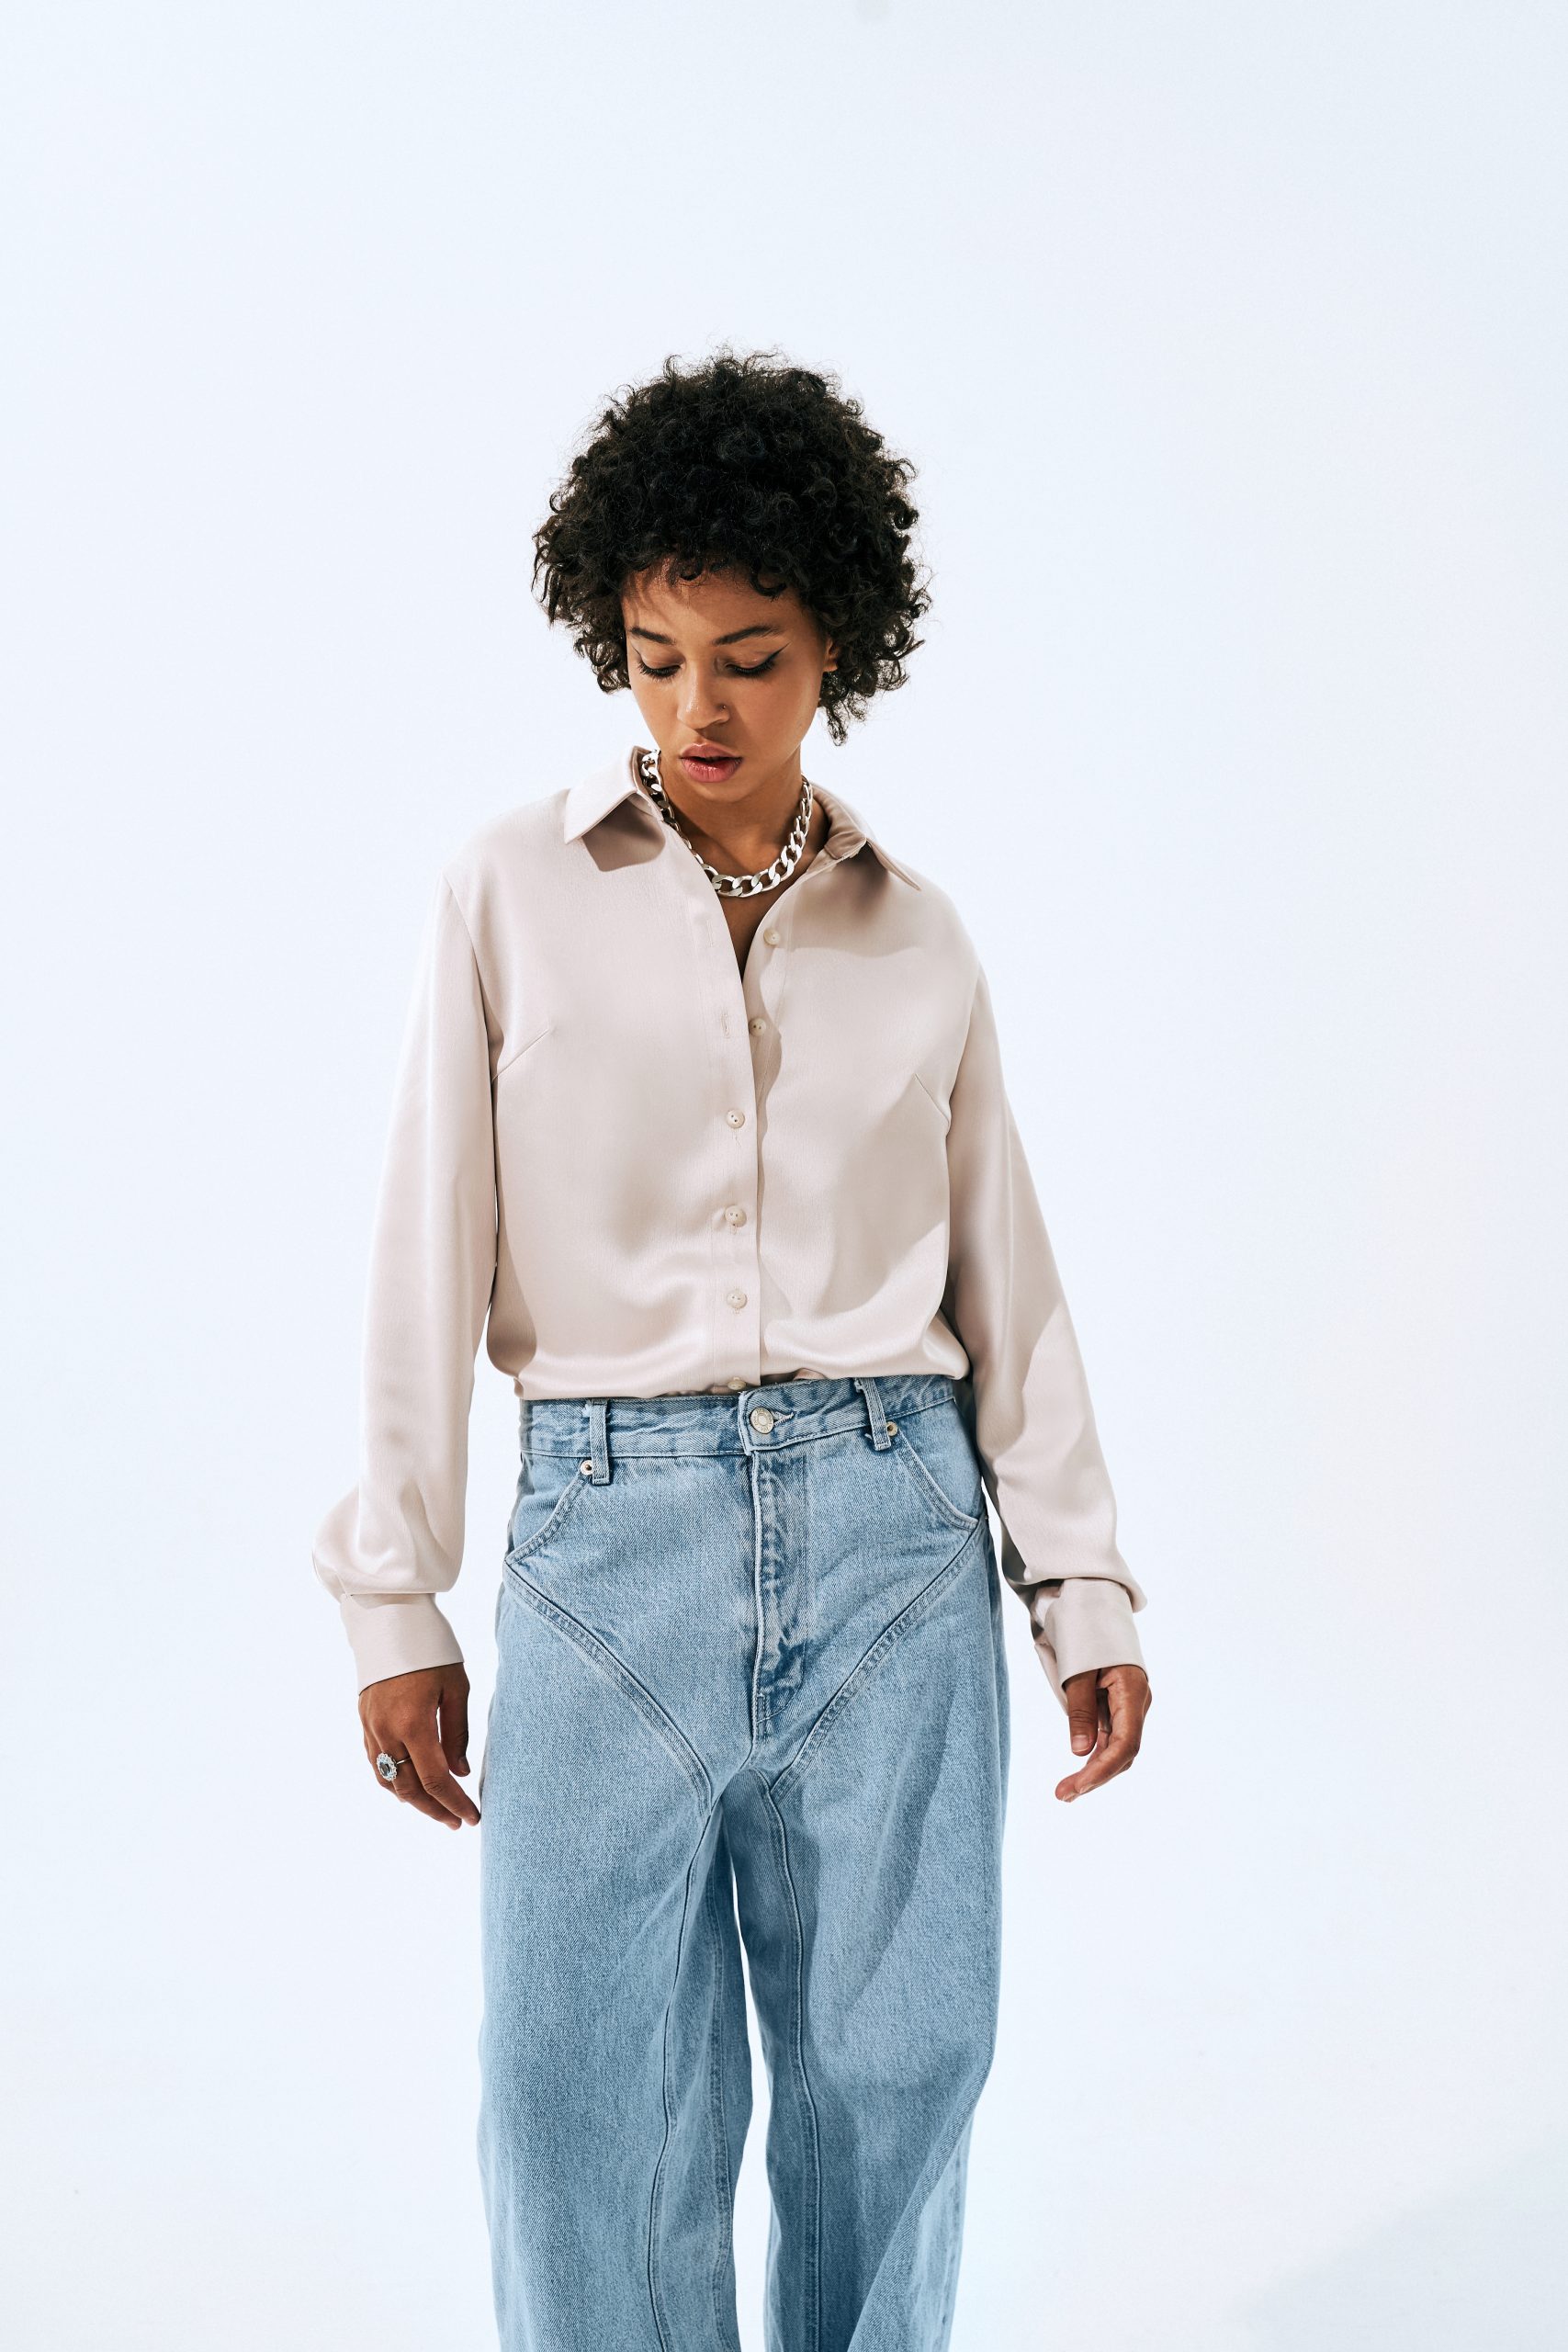 Woman wearing the Kaia Blouse sewing pattern from Vikisews on The Fold Line. A blouse pattern made in silk, artificial silk, cotton, linen, cupro, shirting, lightweight fine wale corduroy or modal fabrics, featuring a semi-fit, straight silhouette, bust darts, double-layer back yoke, turn-down shirt collar with separate collar stand, long set-in drop-shoulder sleeves, cuffs with button closure, front button closure and curved hem with side slits.